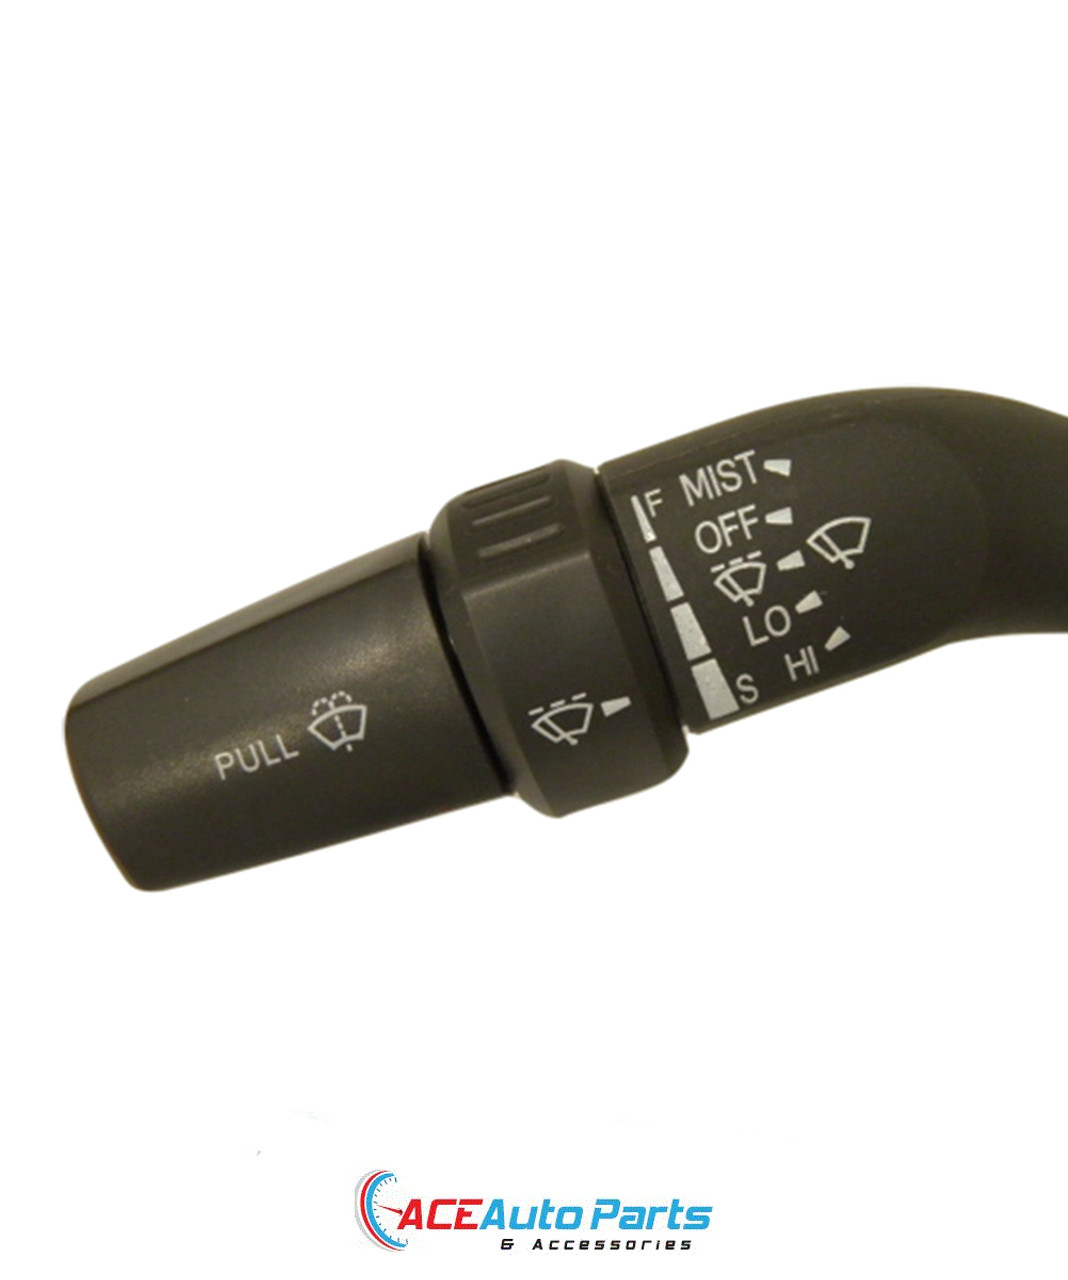 Indicator + Headlight + Wiper Combination Switch for Holden Rodeo RA 